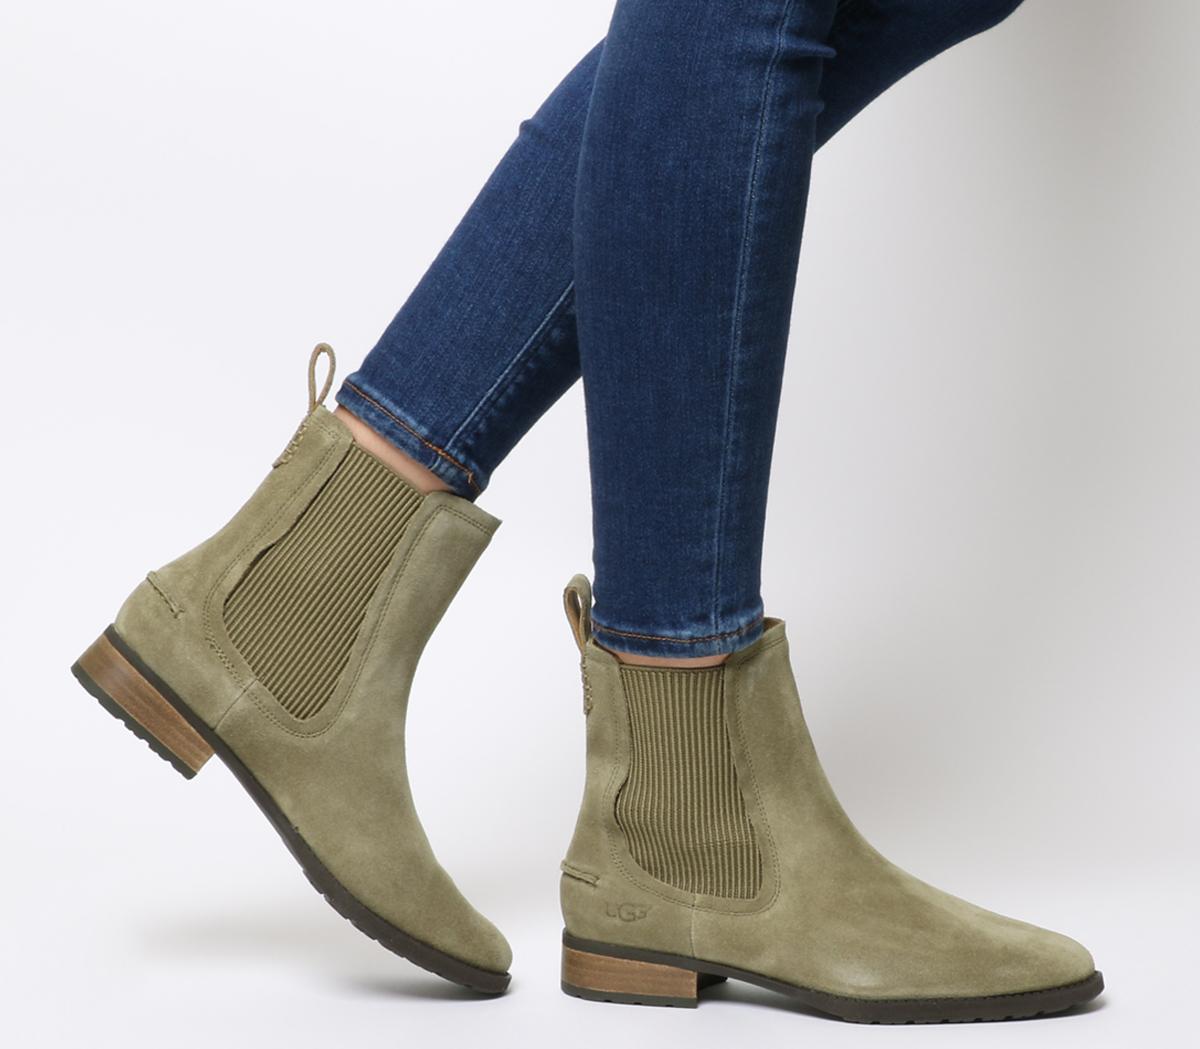 ugg women's mckay ankle boots